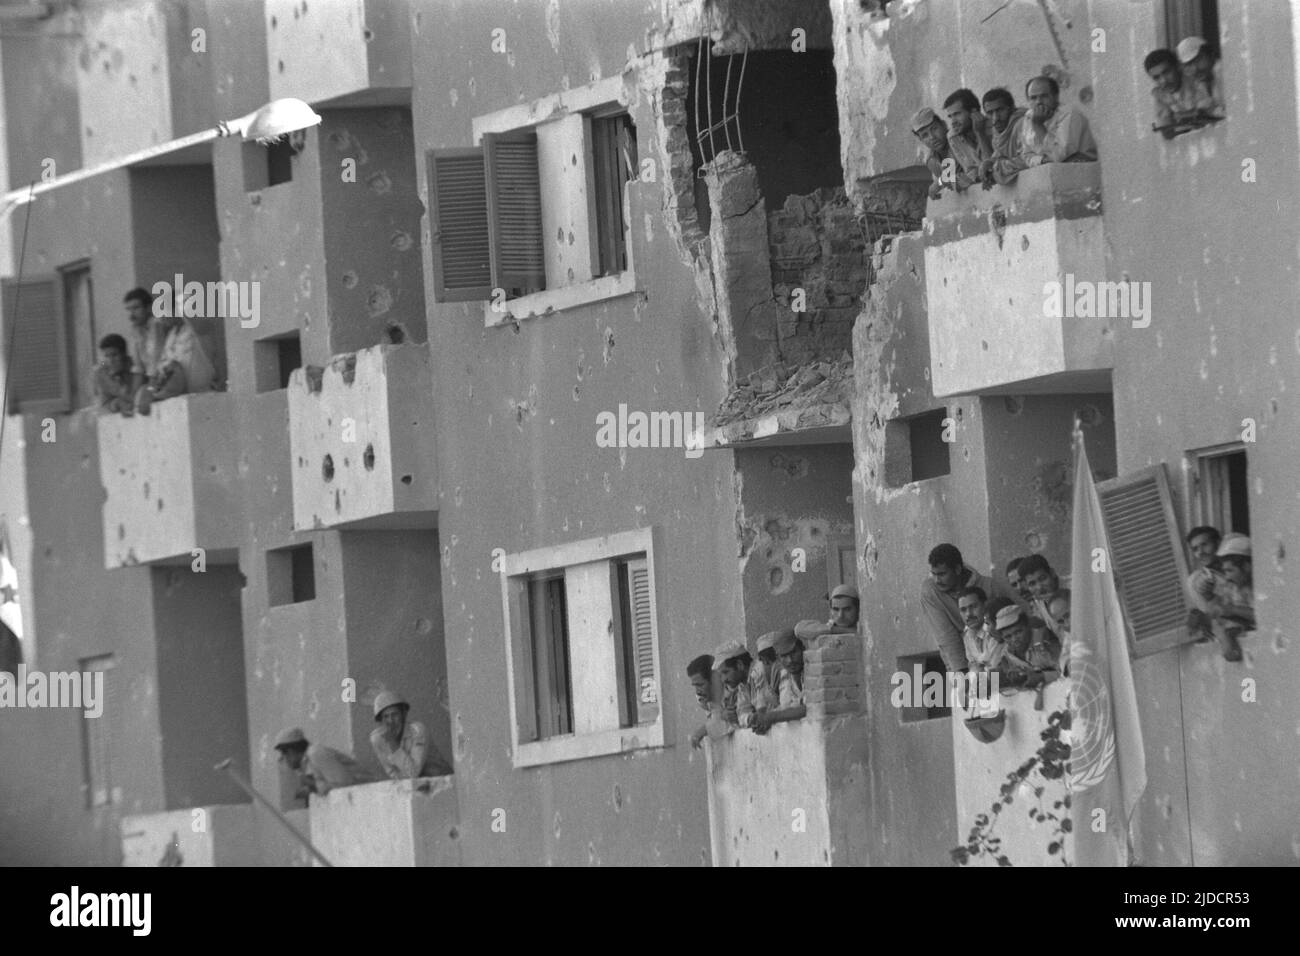 Egyptian soldiers looking out of windows, buildings on the outskirts of Suez, bullet holes can be seen in the wall of the house, during the Yom Kippur War, the Yom Kippur War between Israel and the Arab states of Egypt, Jordan and Syria lasted from 6 October to October 25, 1973, Stock Photo